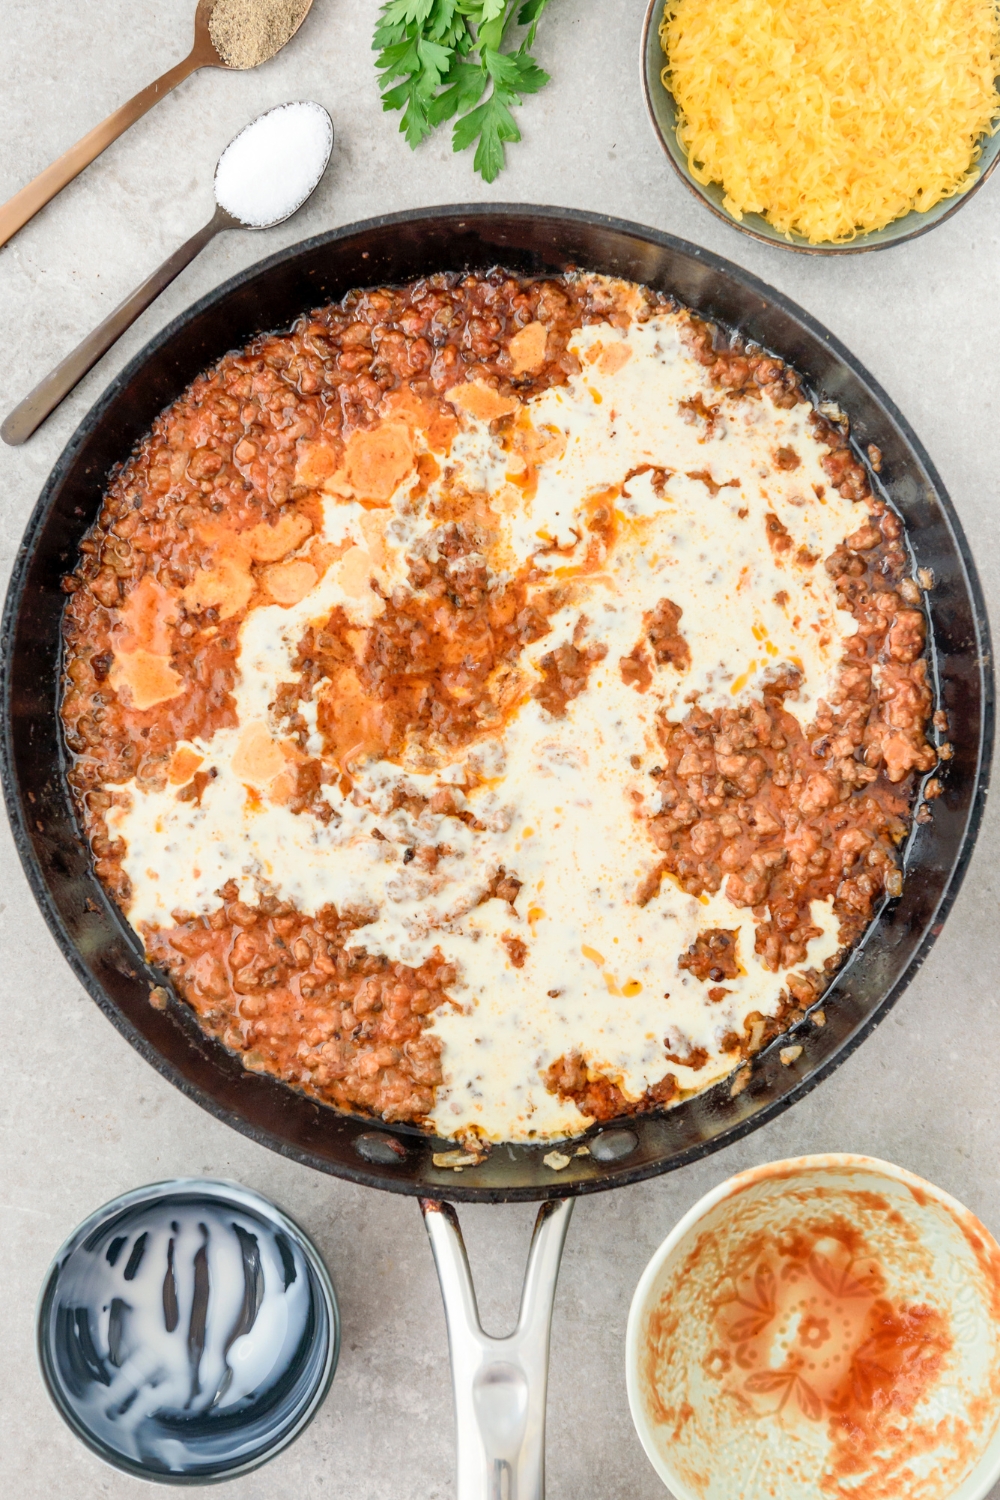 Ground hamburger mixed with cream, tomato sauce, and spices.